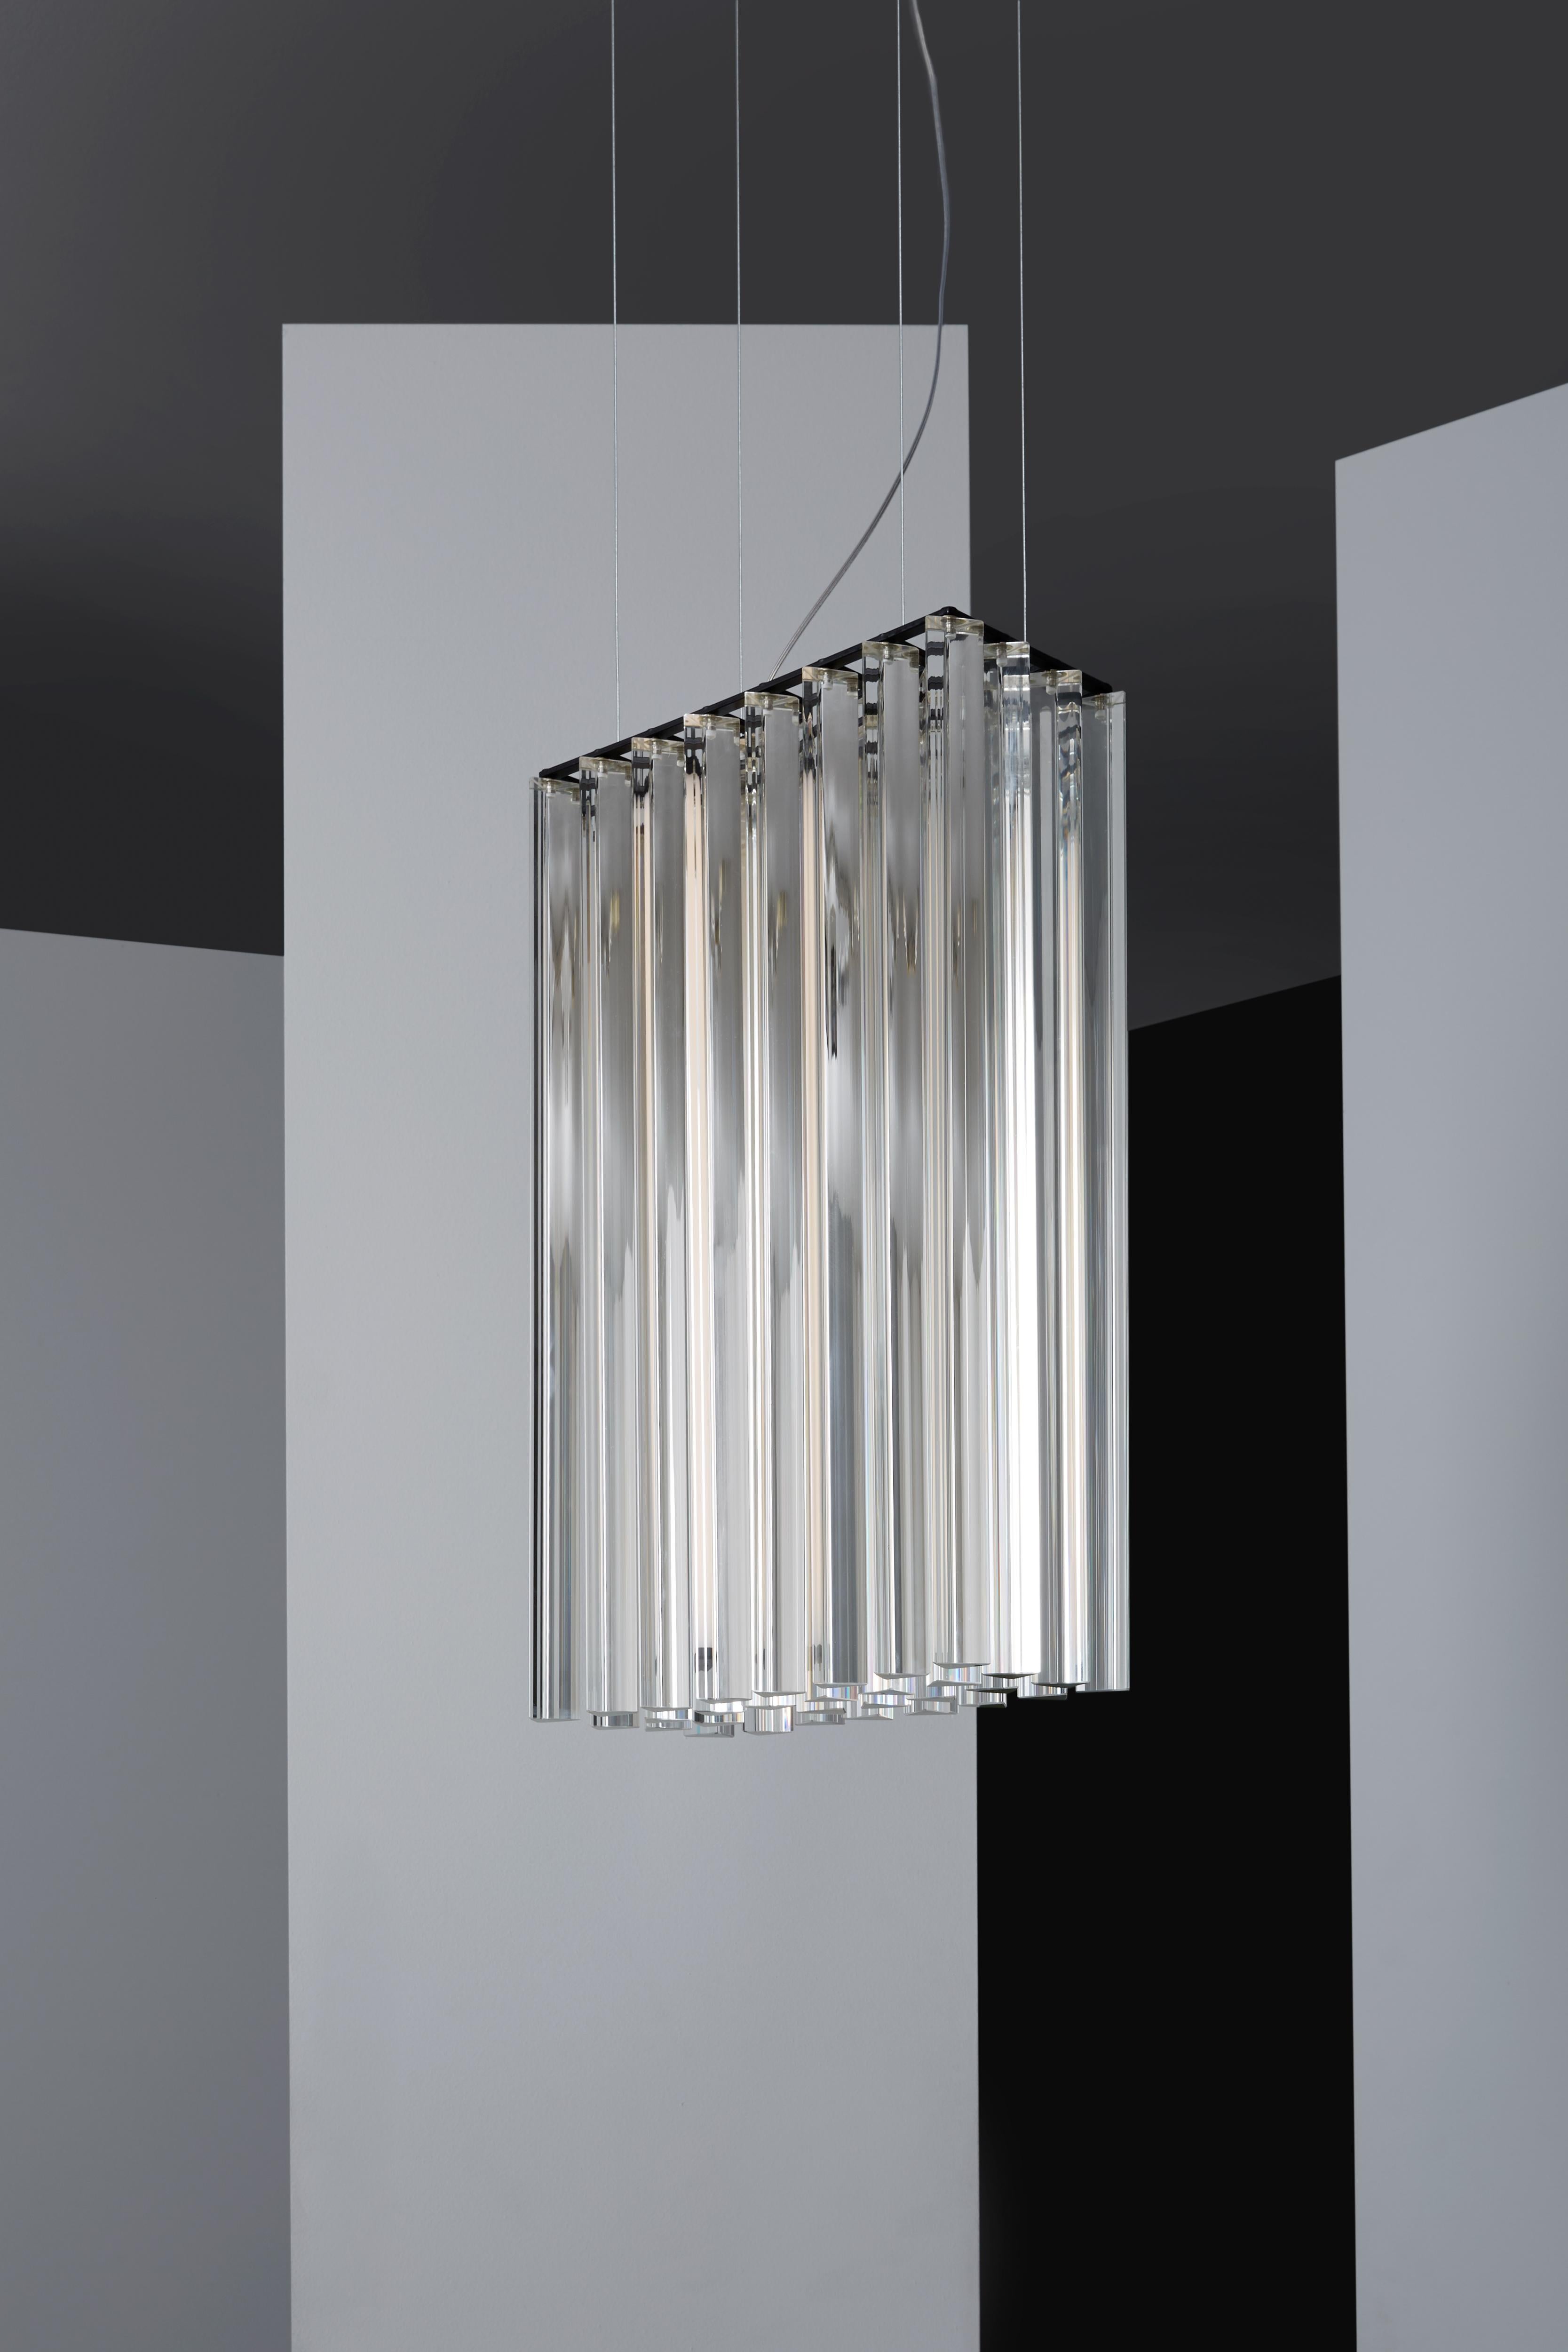 Suspended lamp with diffused light. Black metal structure with steel cables, composed of crystal triangular trihedrons. Strip LED inside the central cylindrical body.
 
Location: Interior
Light source: 1 × 17W LED 2225lm 2700°K CRI90
Voltage: